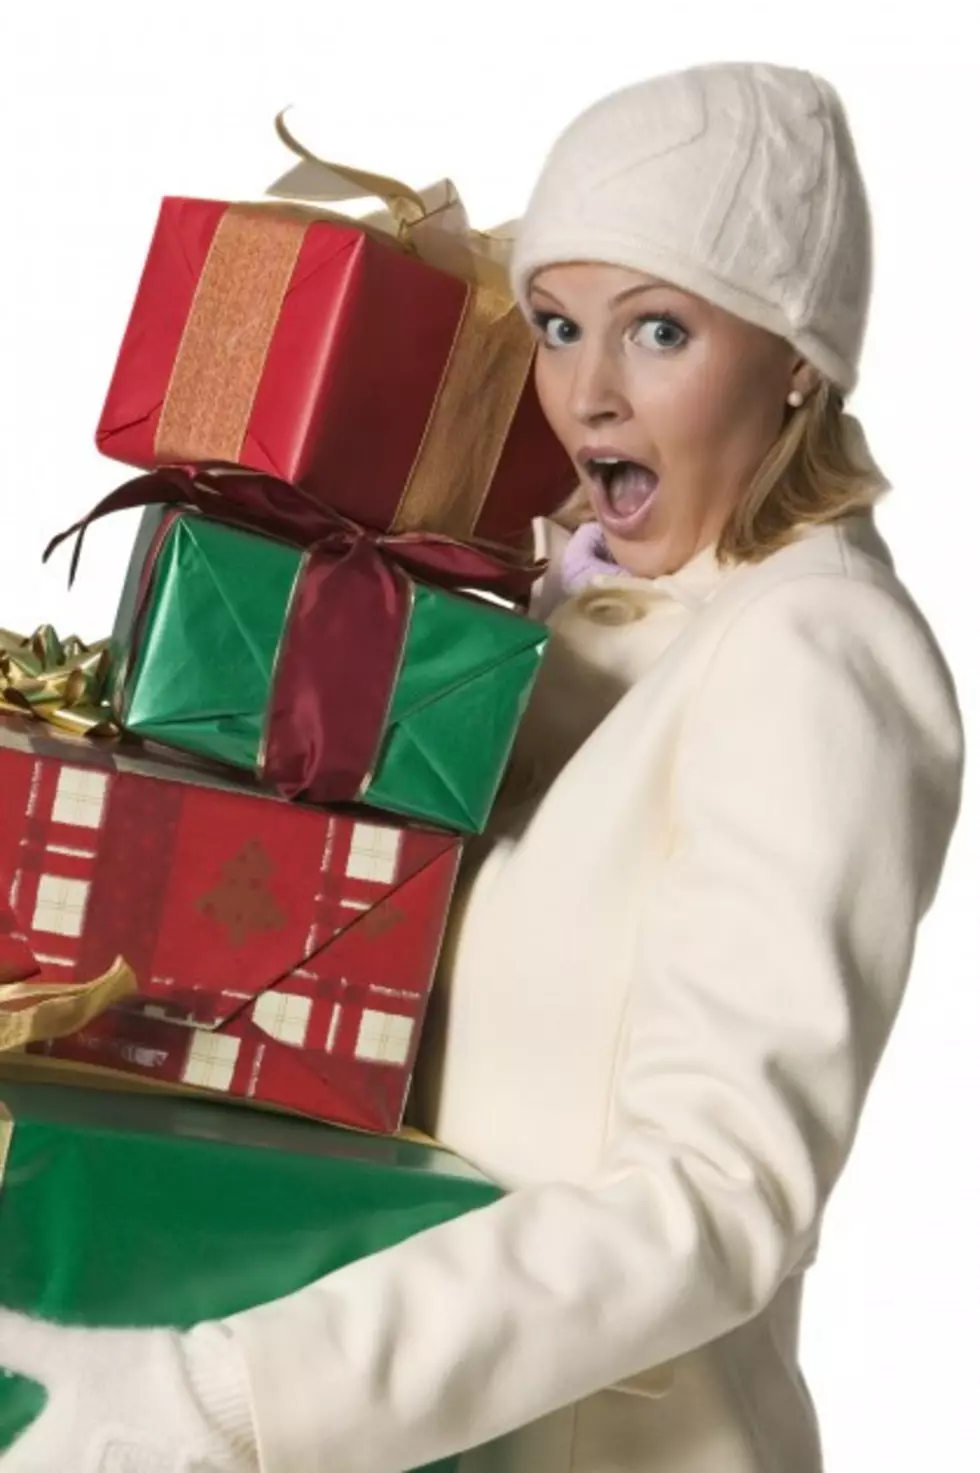 When Do You Start Your Holiday Shopping? [Poll]